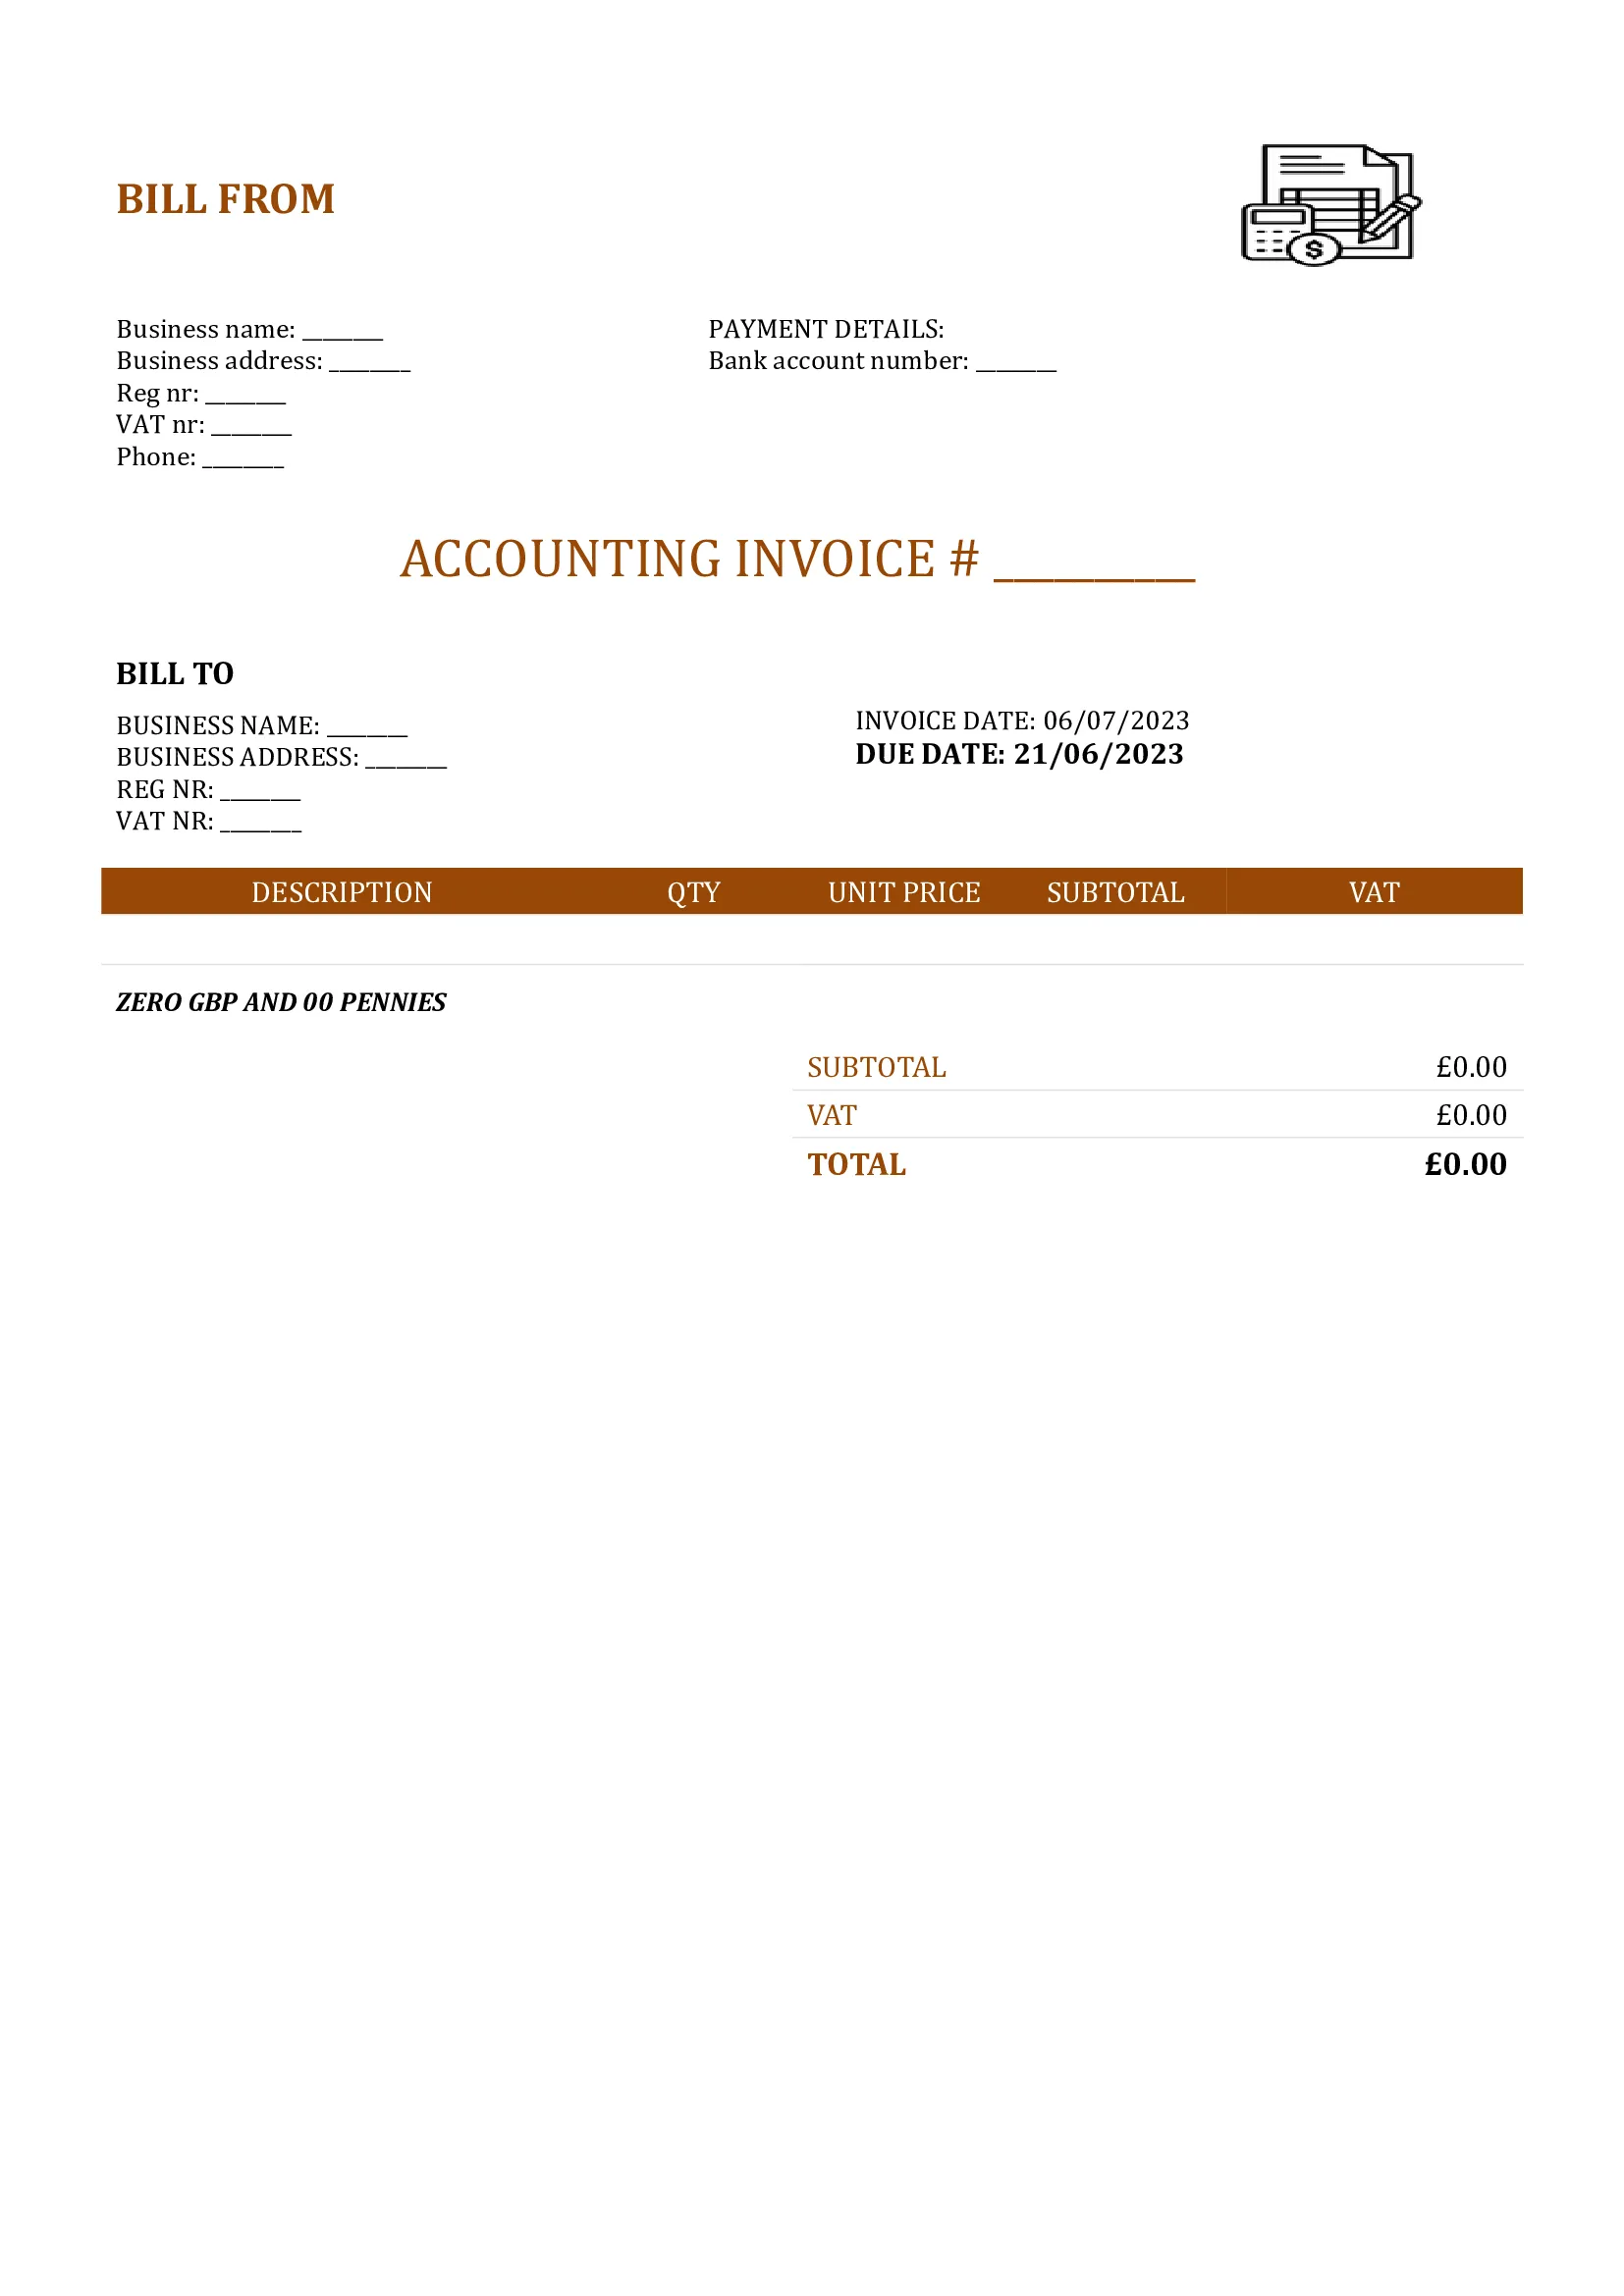 blank accounting invoice template UK Word / Google docs